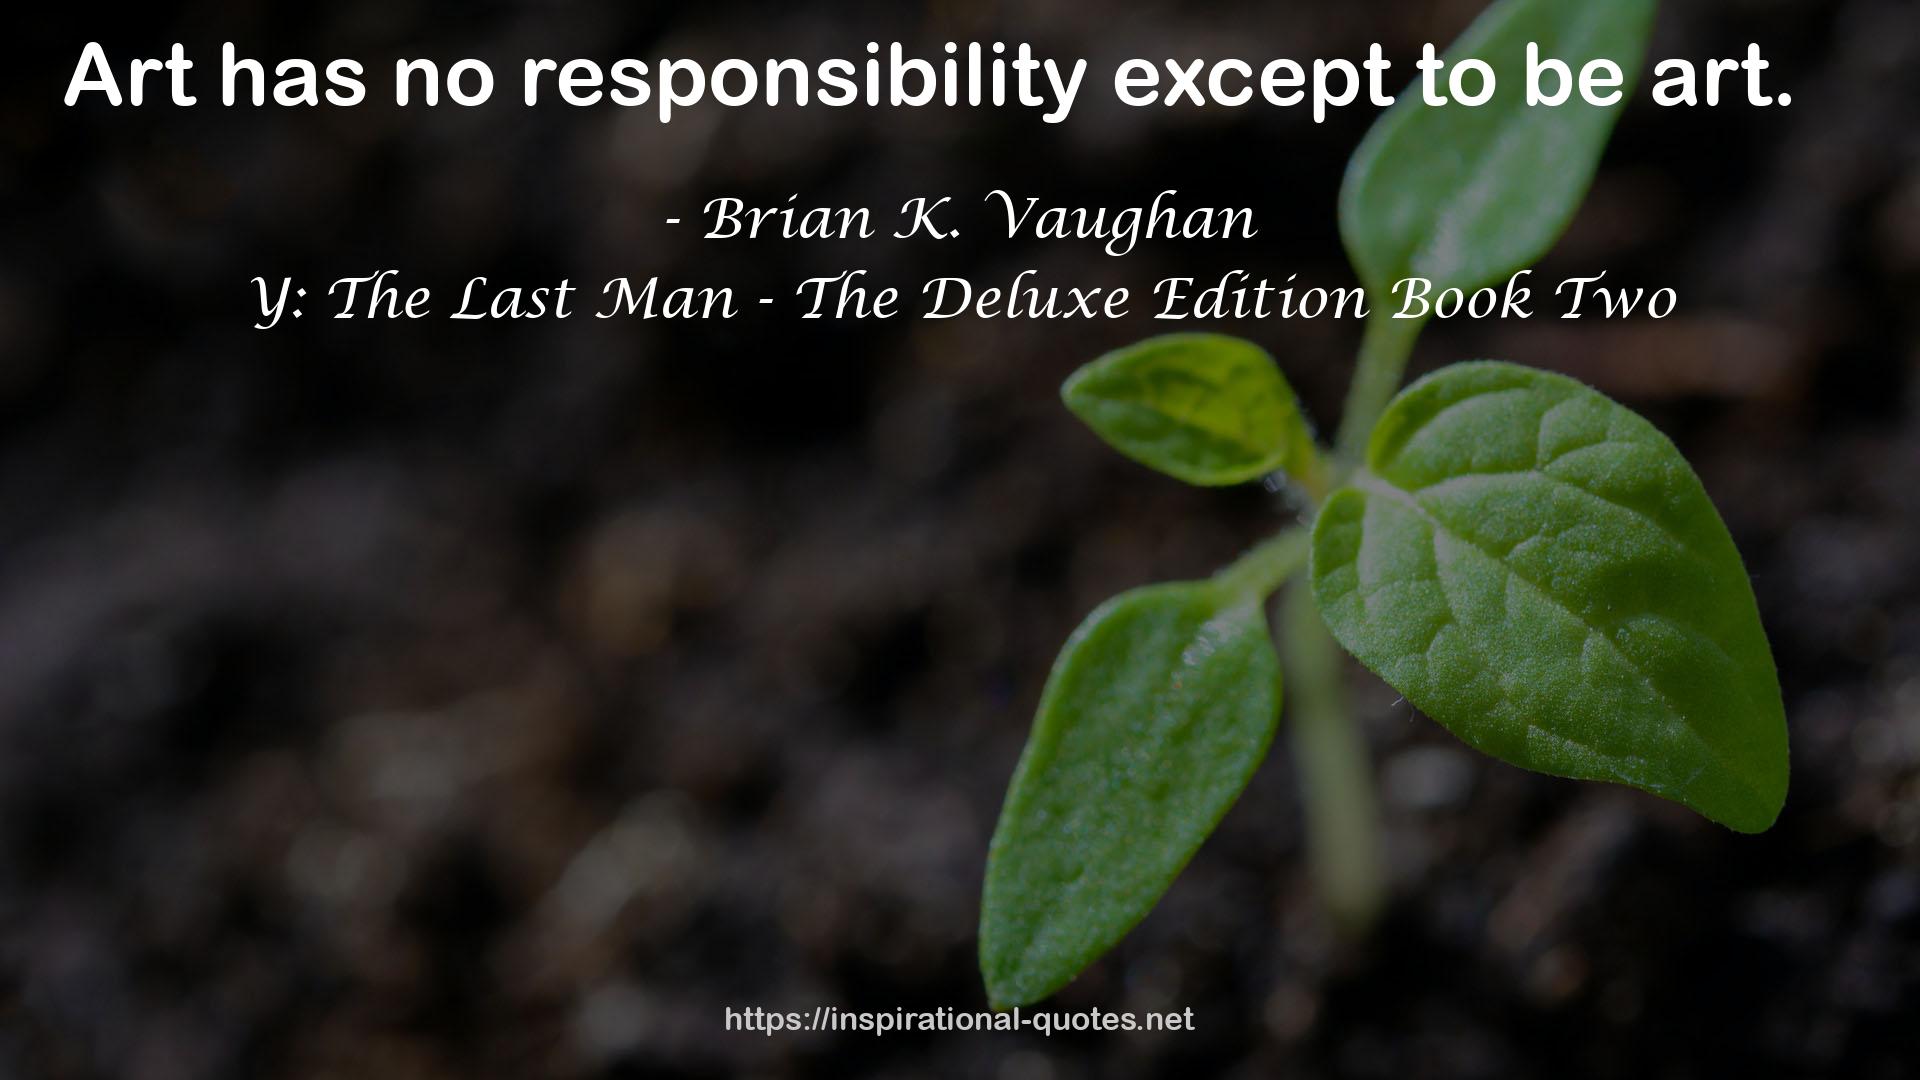 Y: The Last Man - The Deluxe Edition Book Two QUOTES